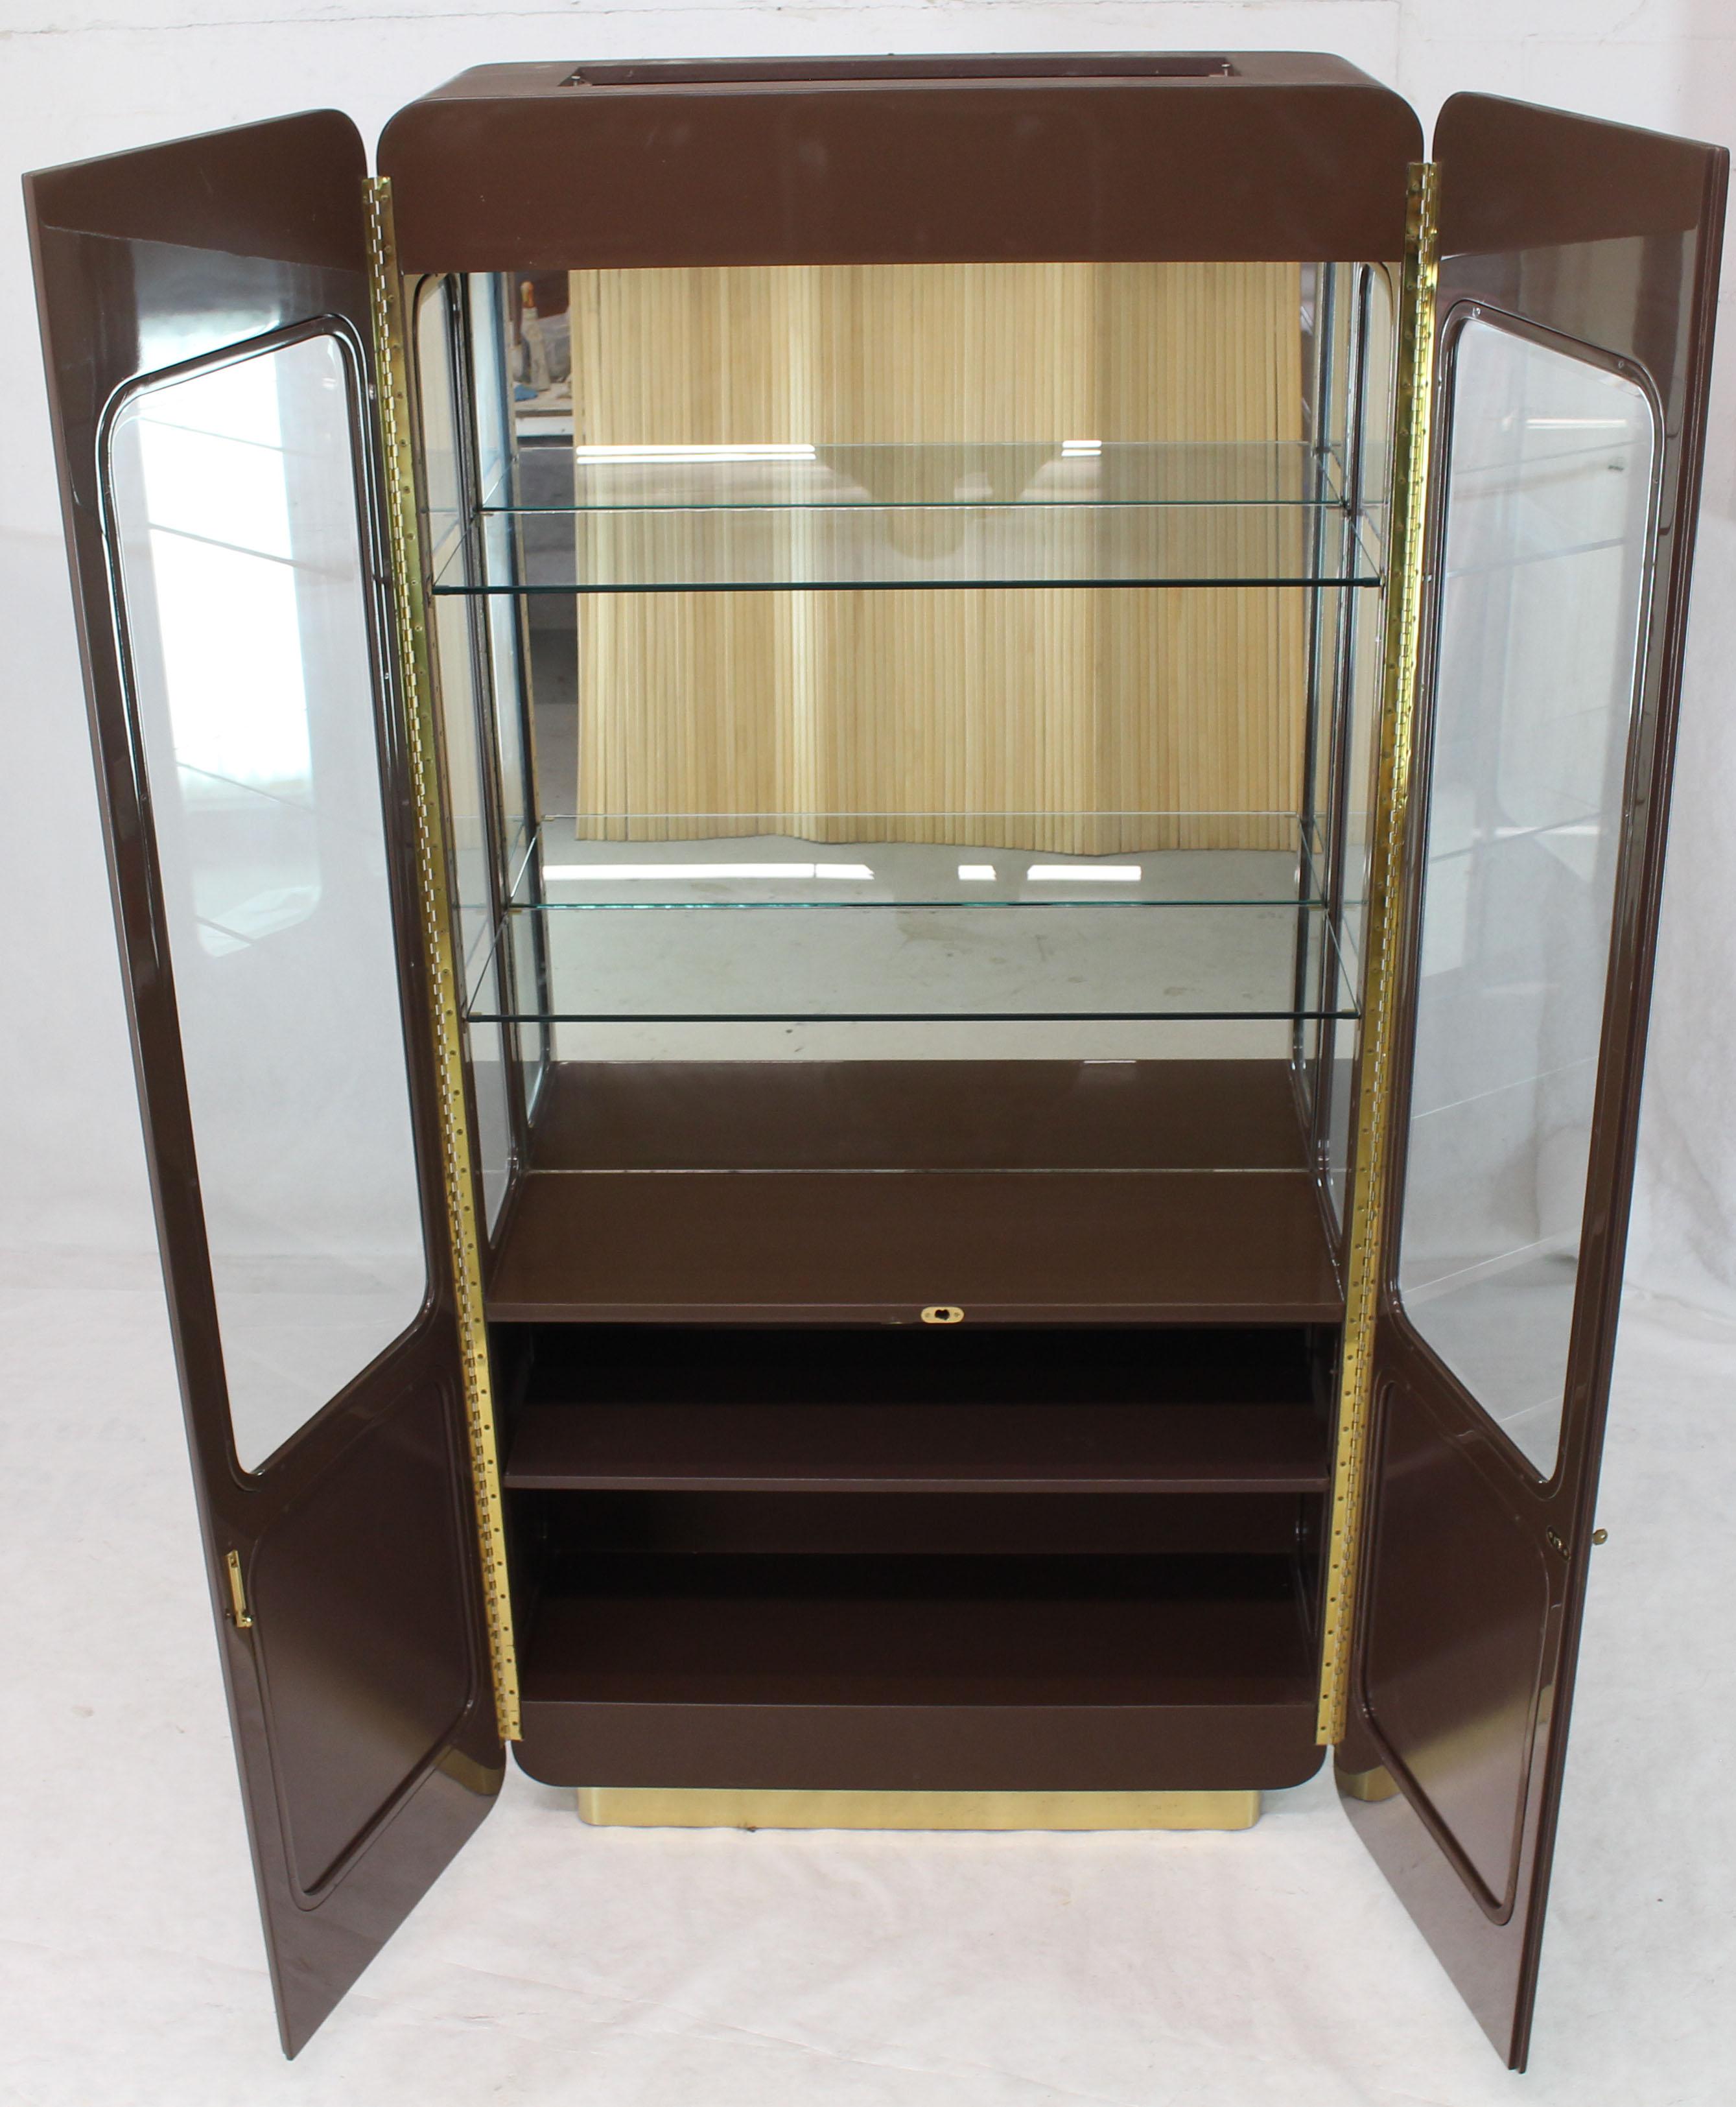 Tall High Gloss Lacquer Finish Rounded Beveled Glass Display Cabinet Wall Unit In Excellent Condition For Sale In Rockaway, NJ